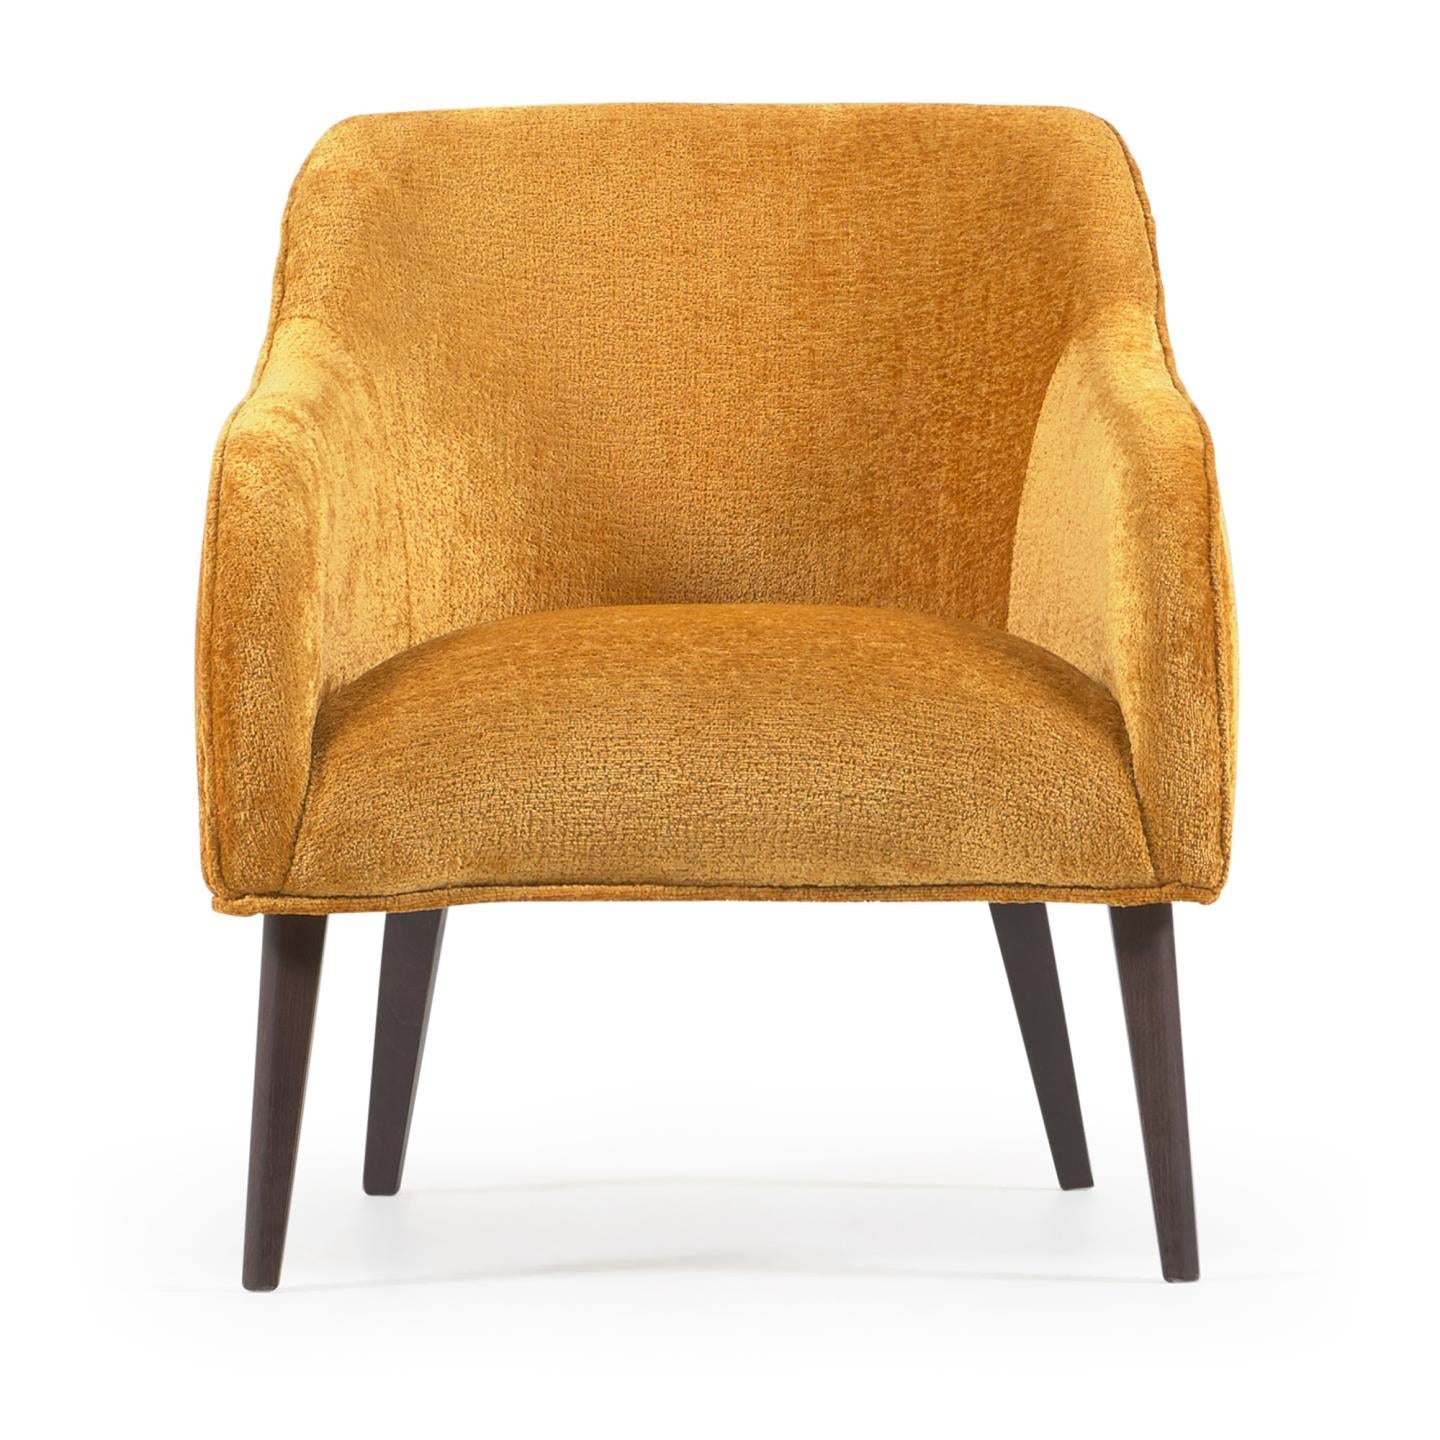 Bobly armchair in mustard chenille and wooden legs with wenge finish